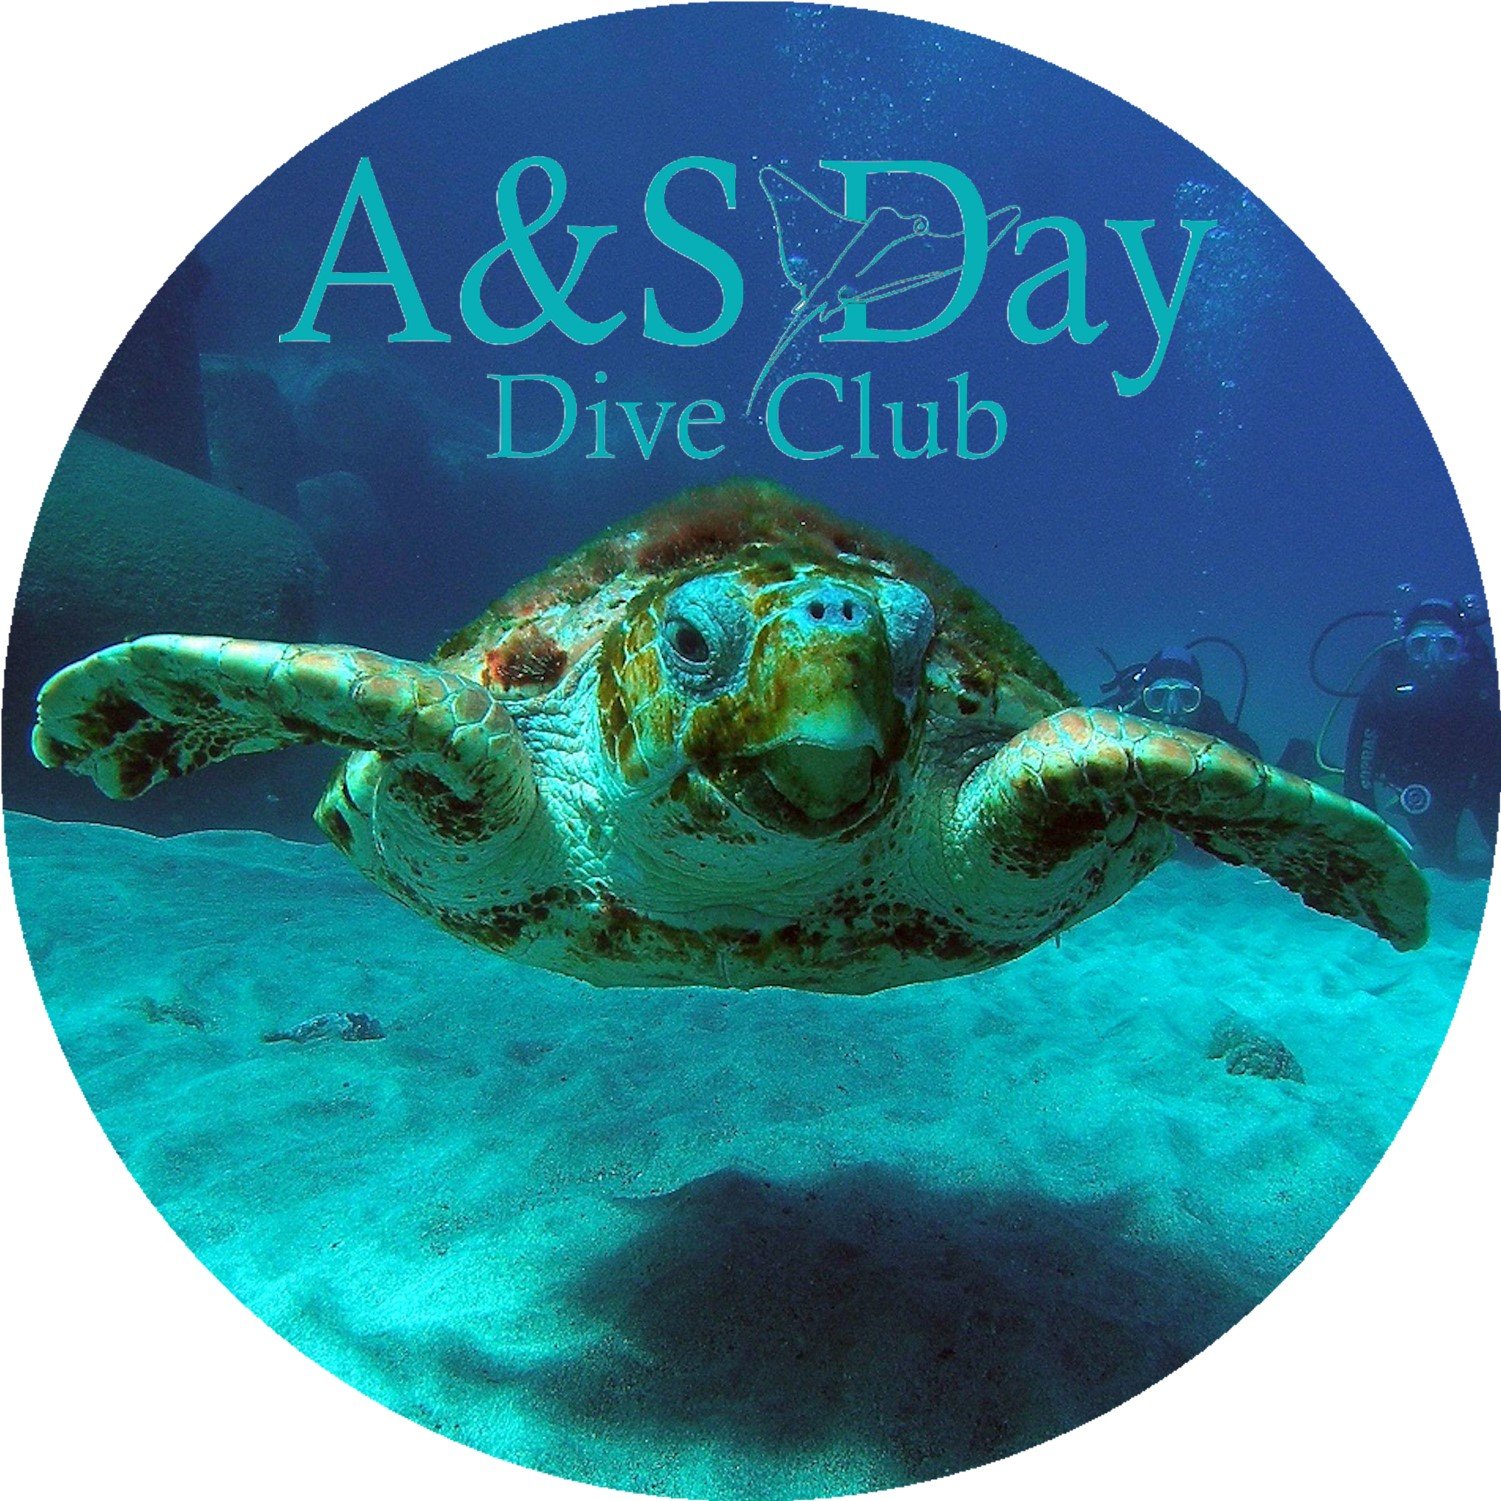 A & S Day Dive Club